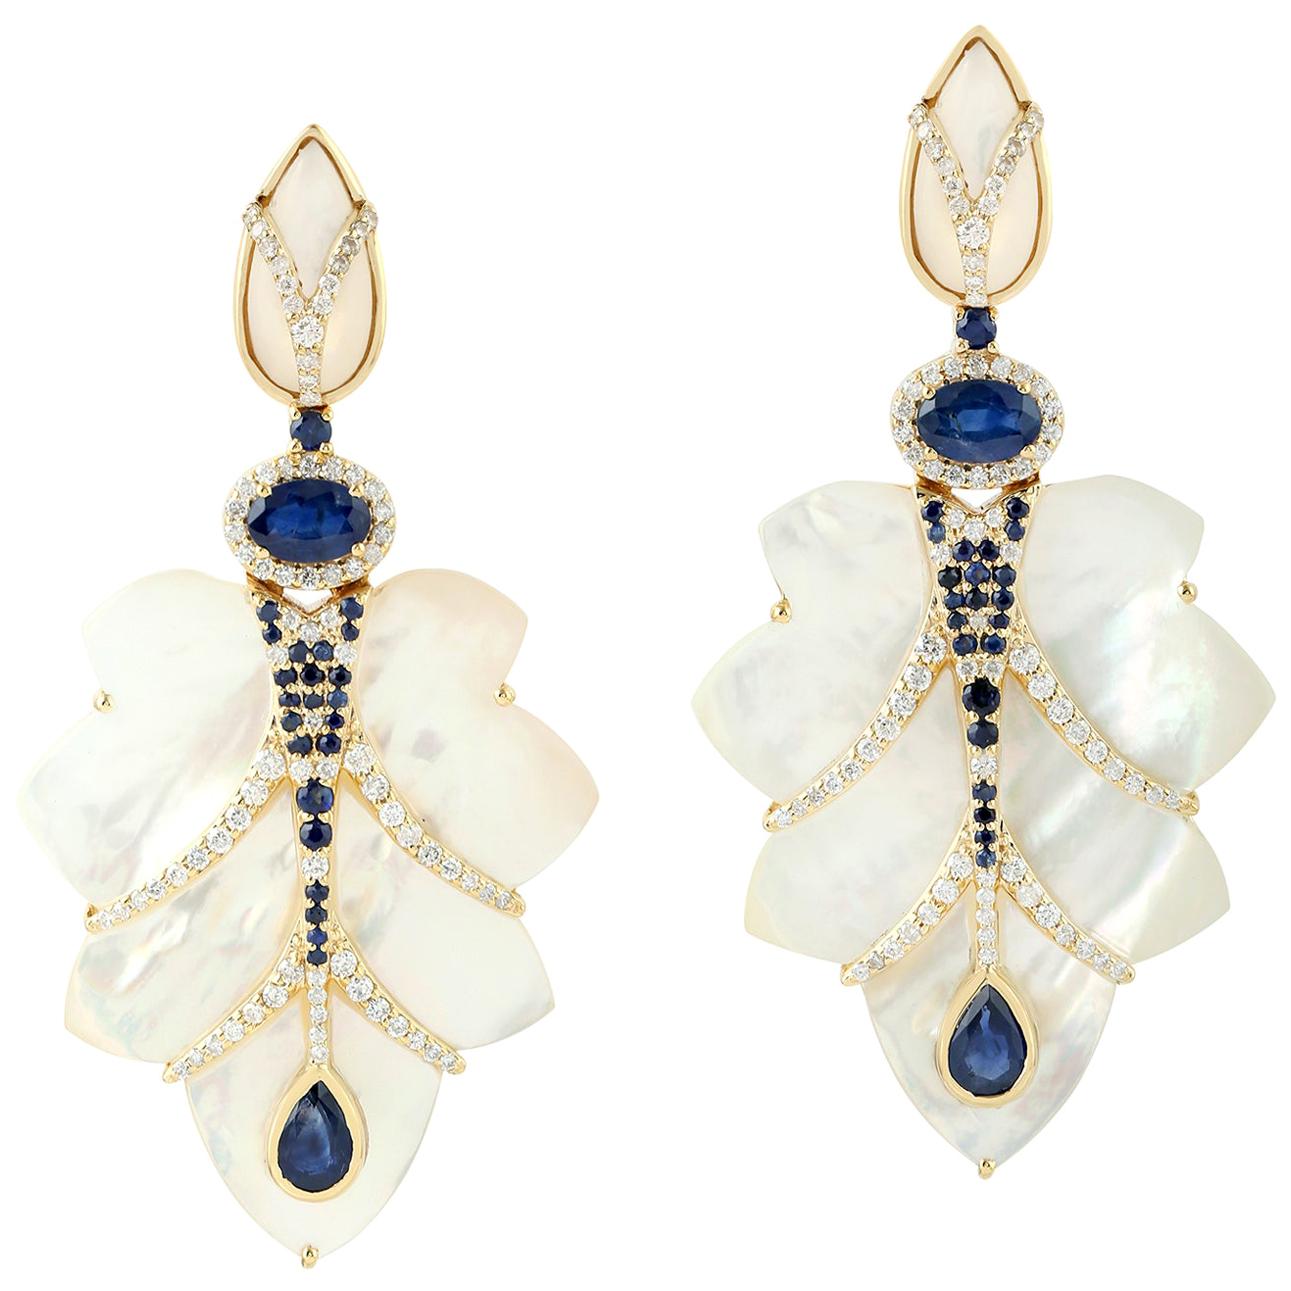 Fancy Mother of Pearl Earrings with Sapphire and Diamonds